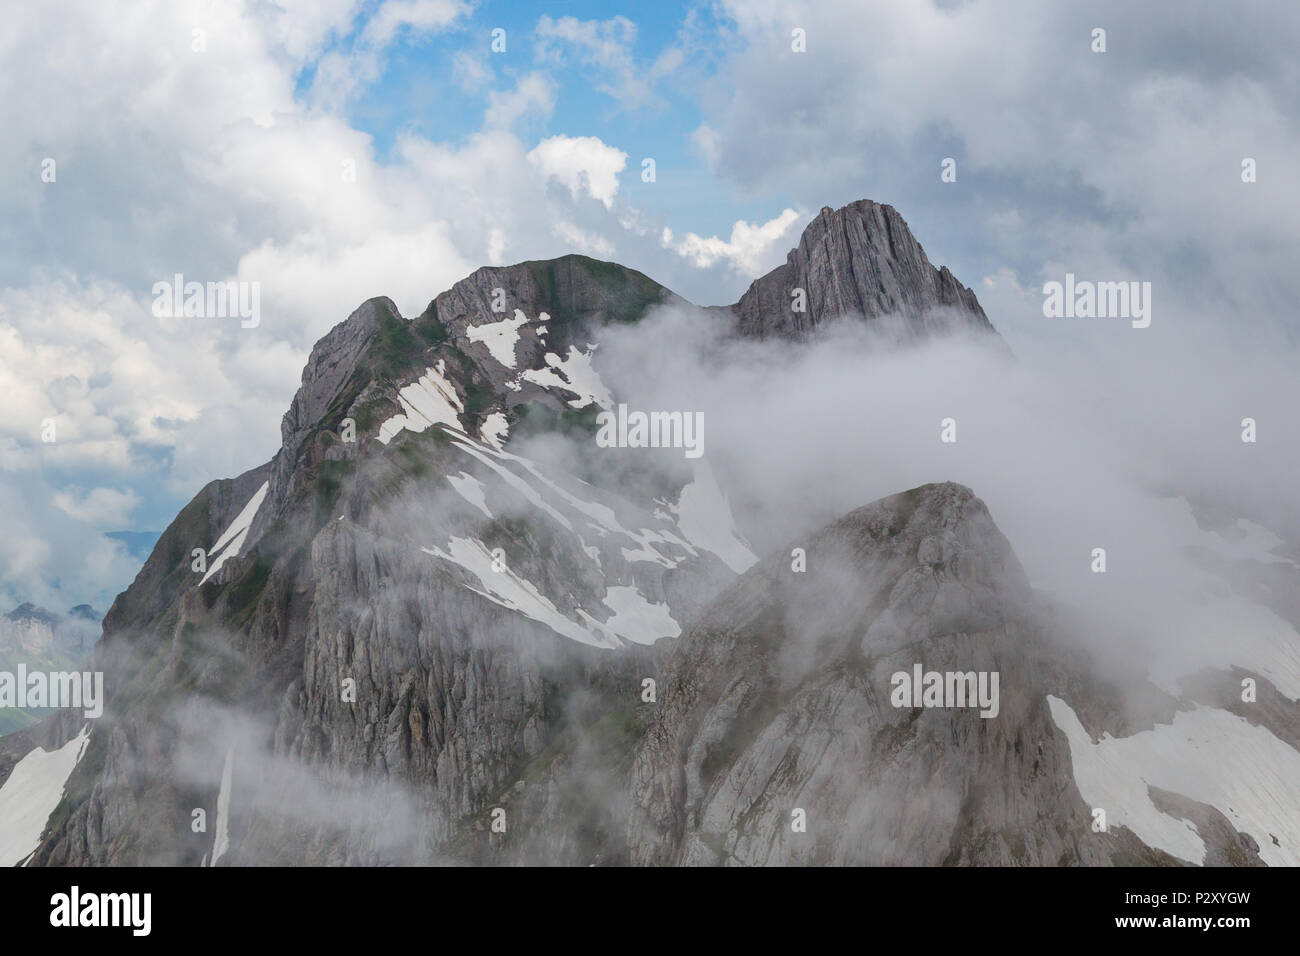 peak of natural Altmann mountain in clouds, Alpstein, clouds, blue sky Stock Photo